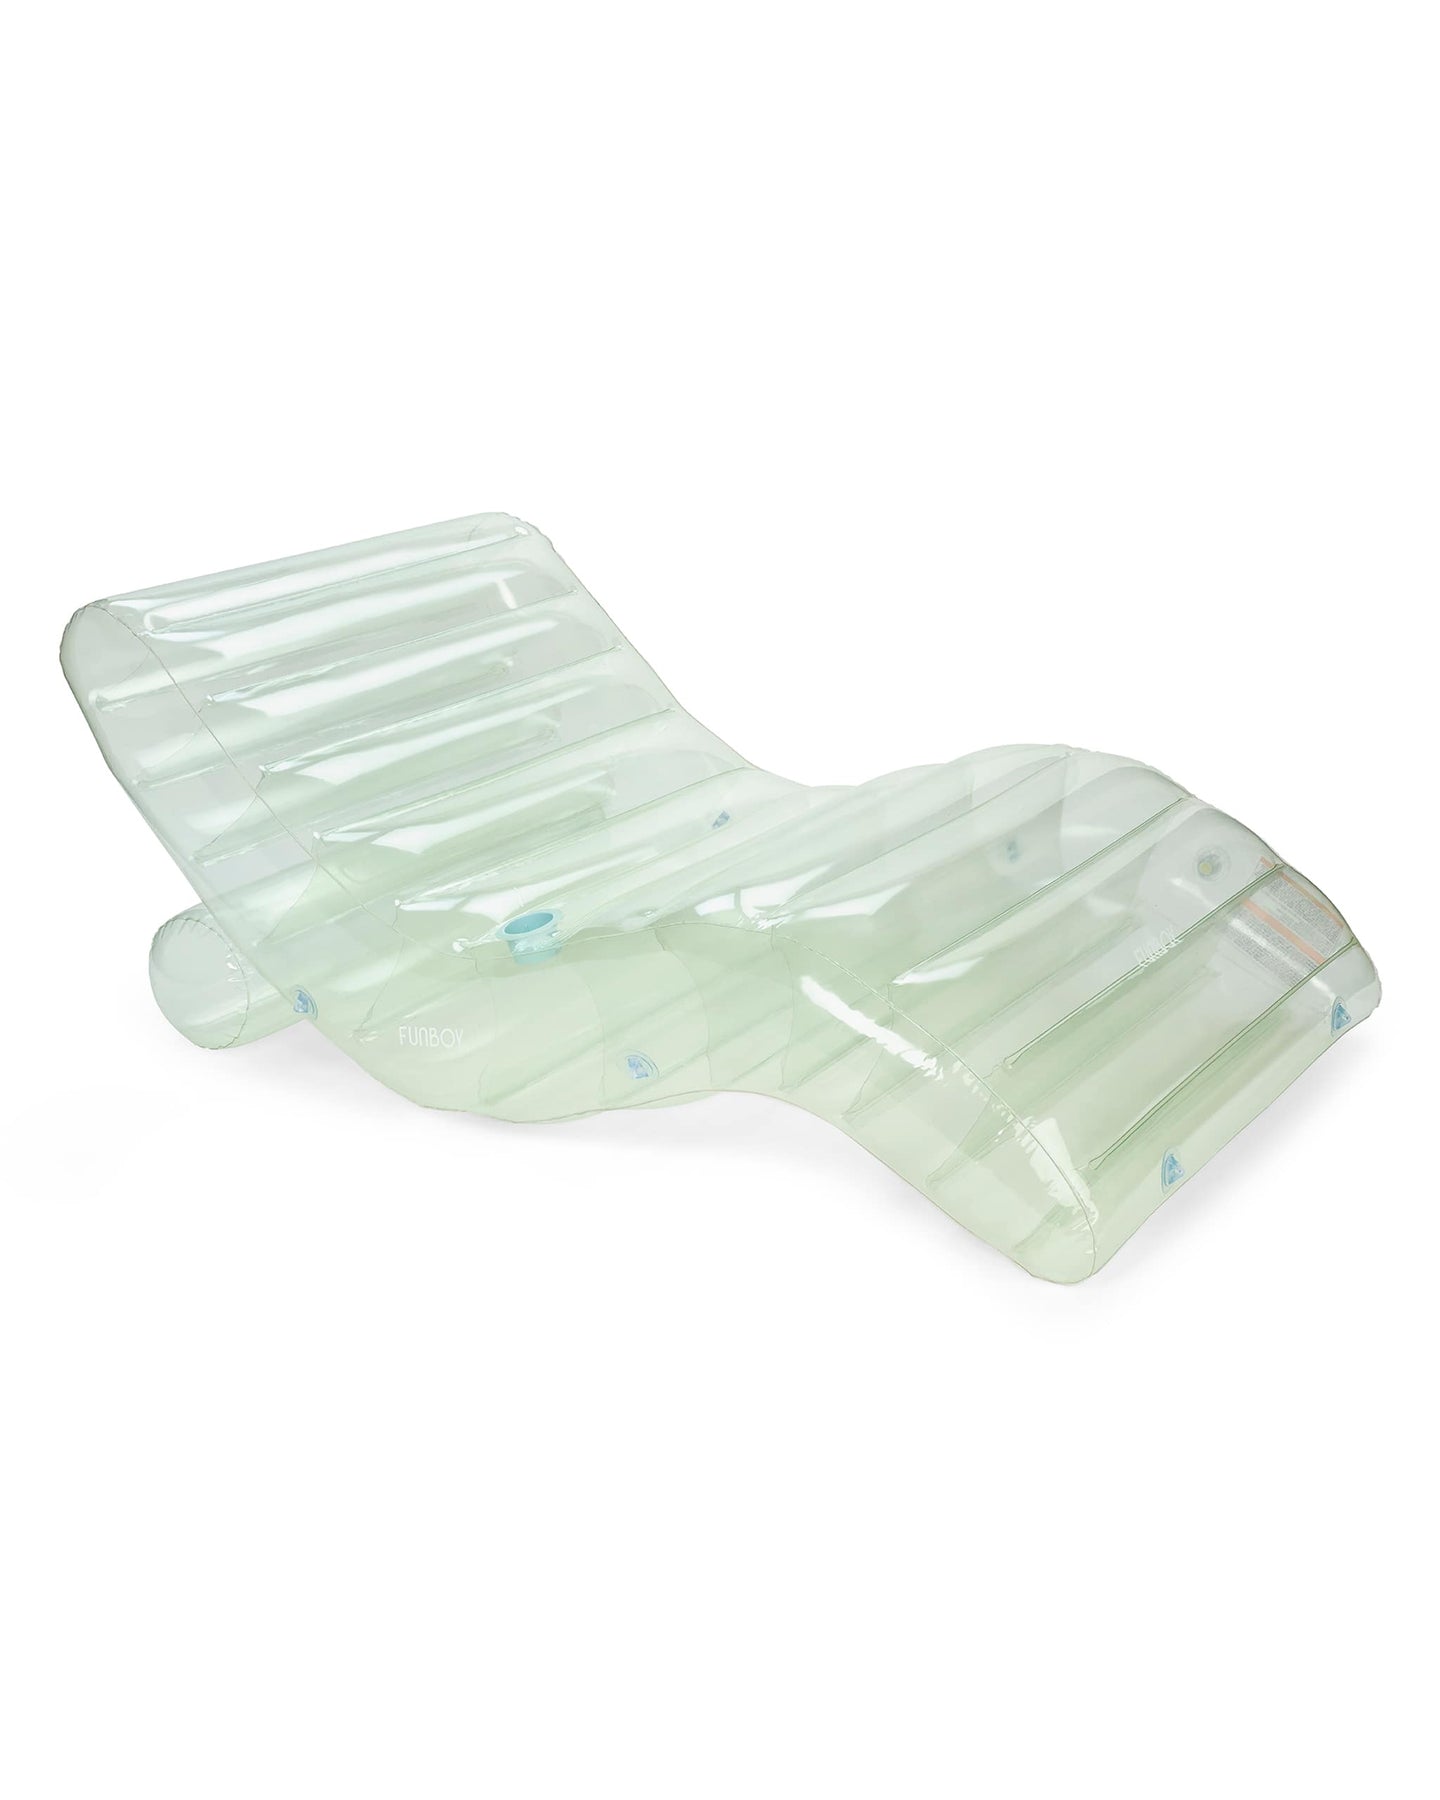 Green Seaglass Chaise Lounger Pool Float